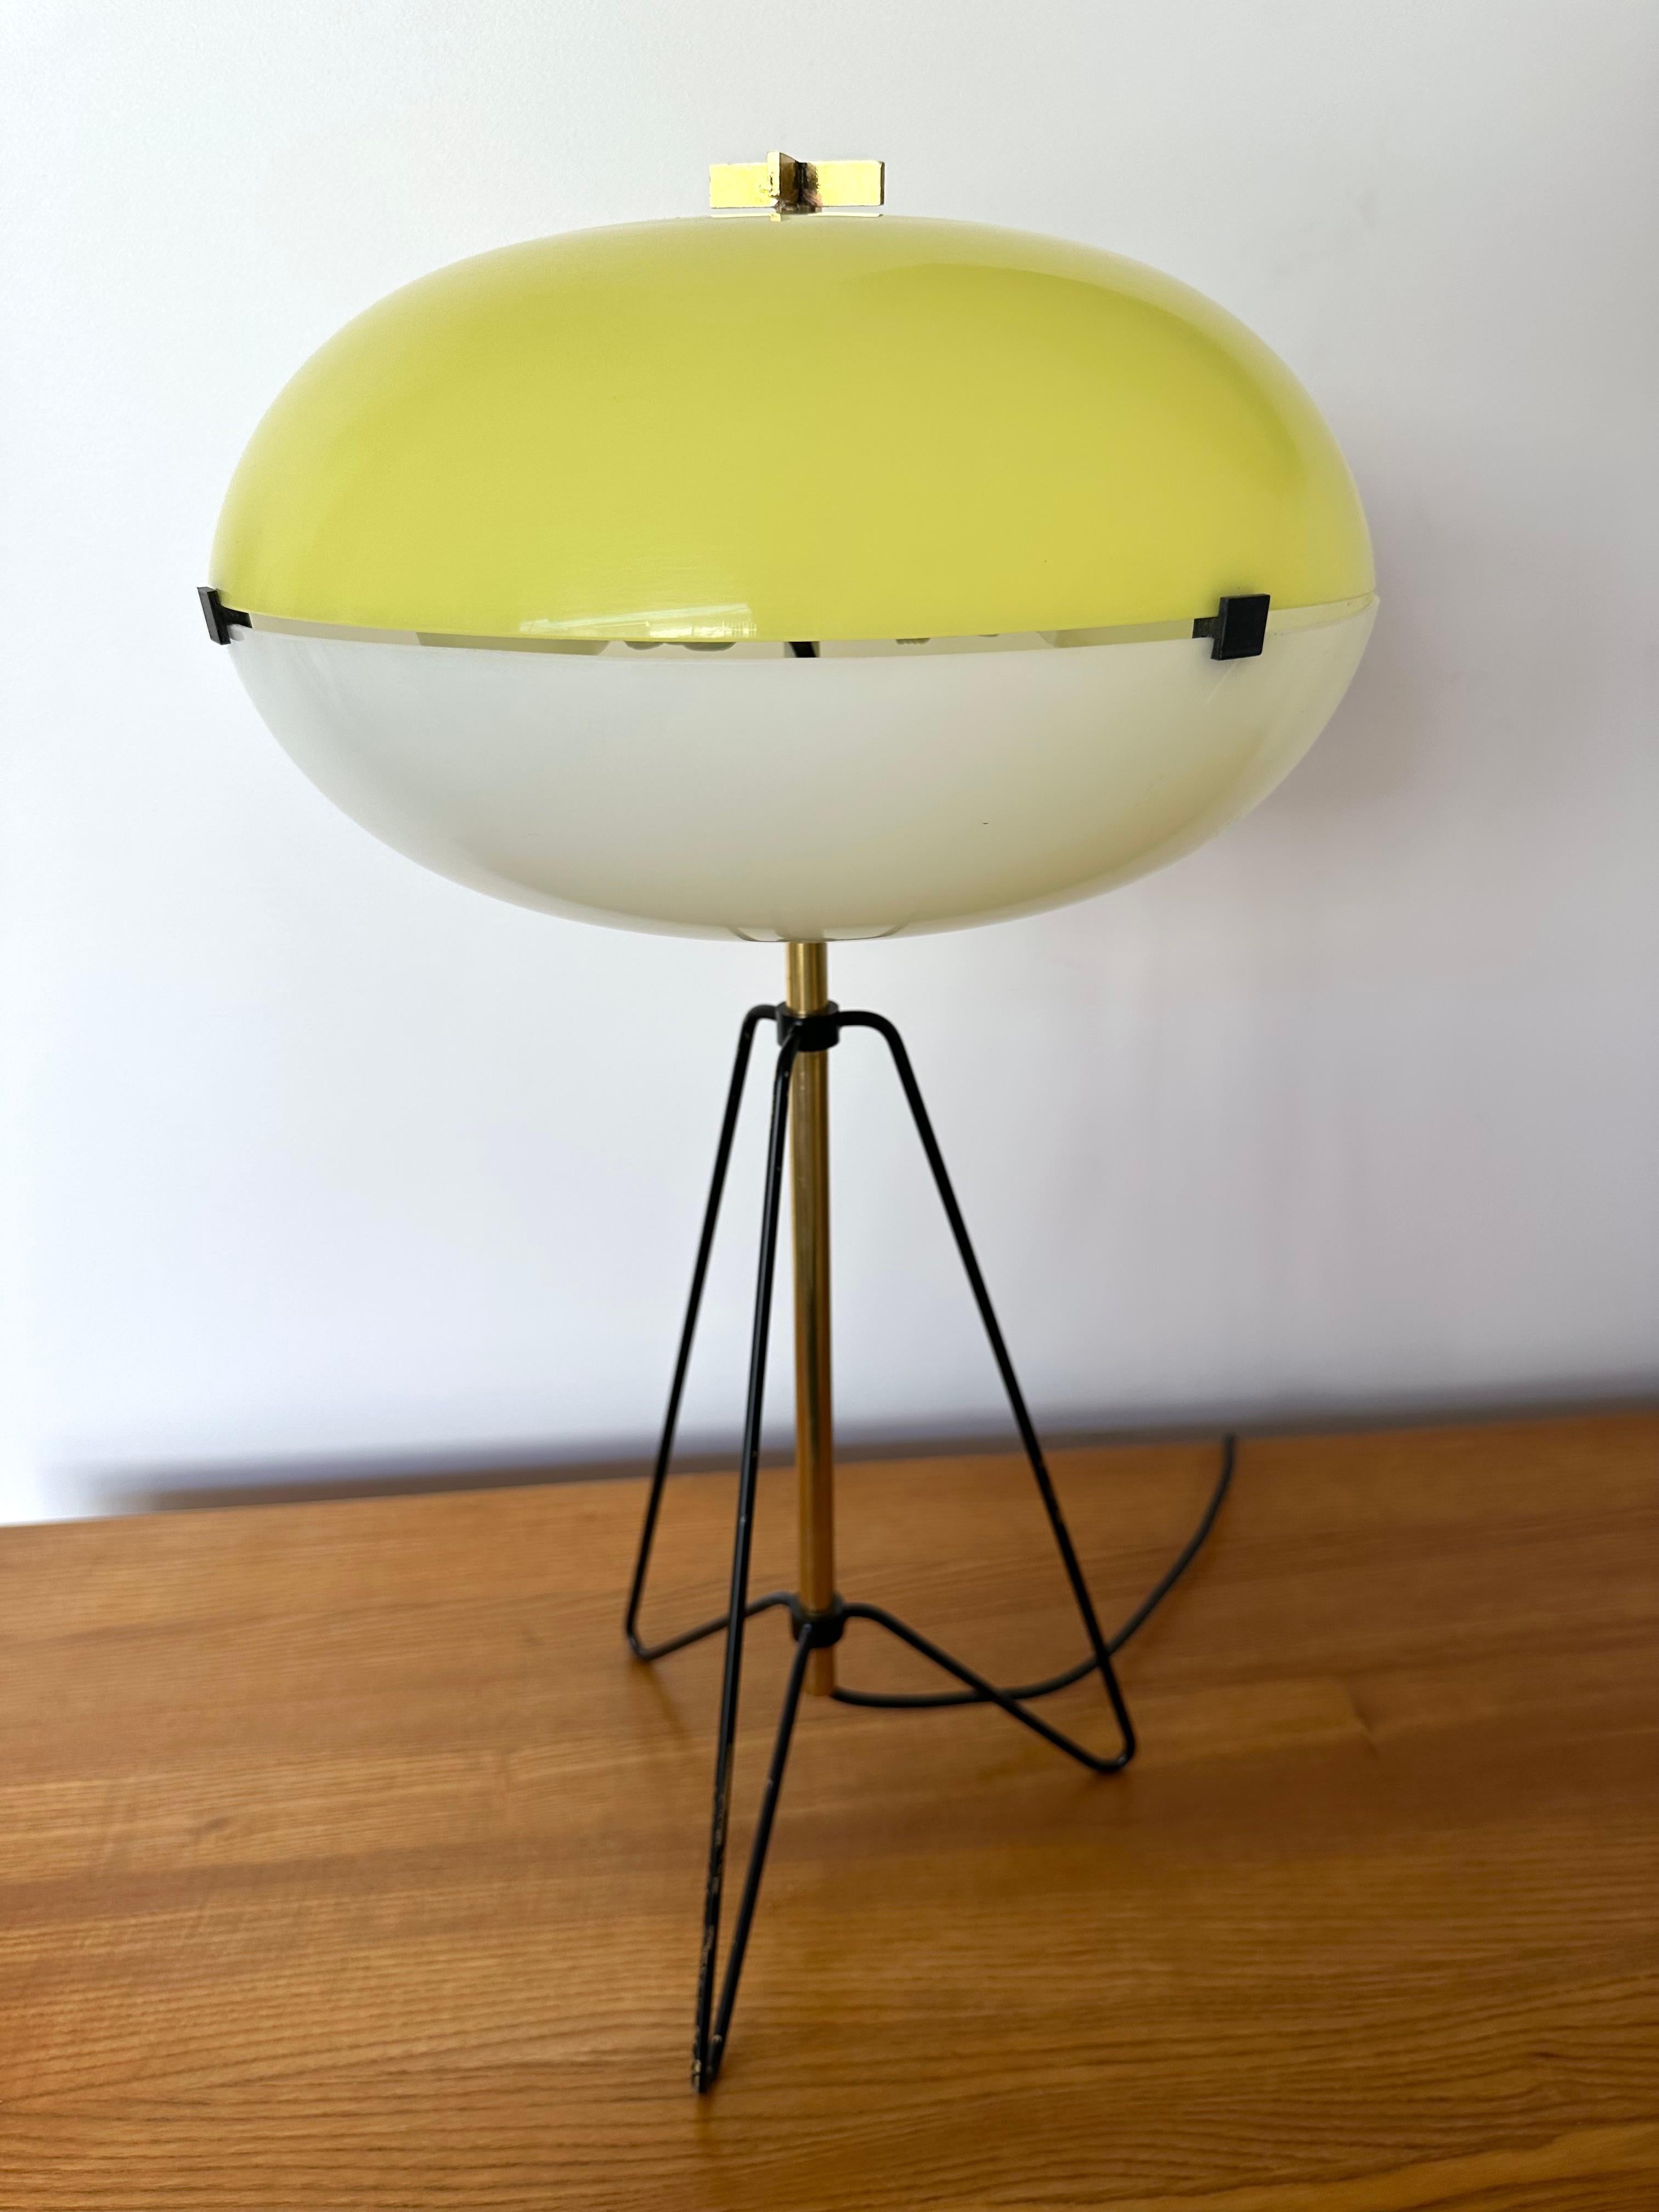 Midcentury Table Lamp Methacrylate and Brass by Stilnovo, Italy, 1960s For Sale 2